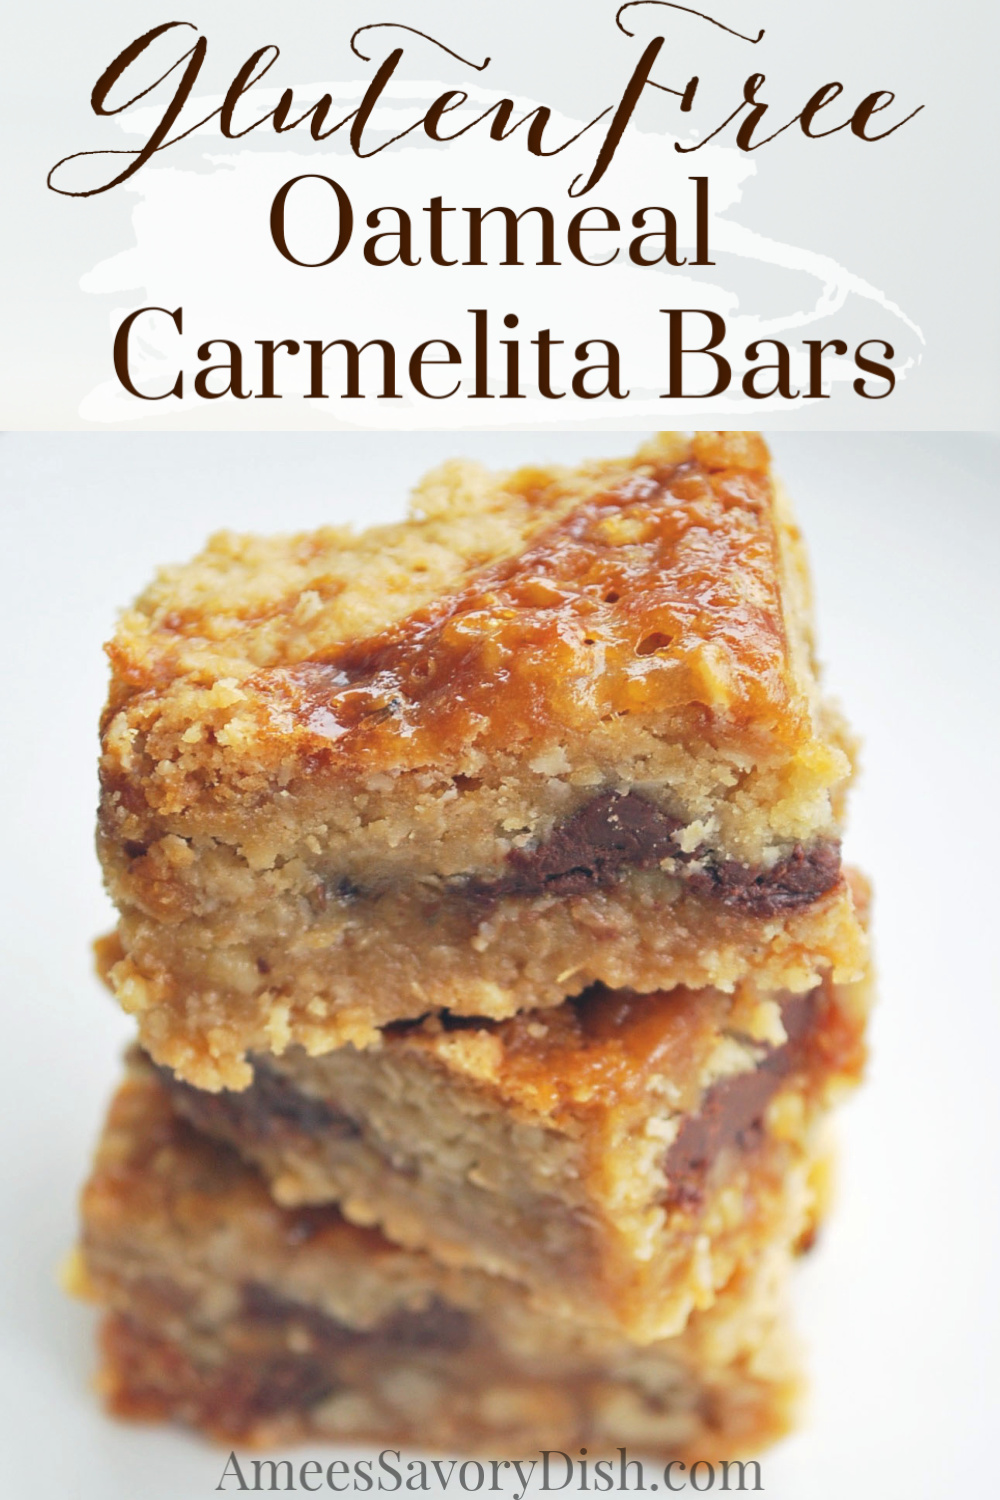 Gluten-free oatmeal Carmelita bars are chewy oatmeal bars with creamy caramel, chocolate, and crunchy pecans. This easy gluten-free bar cookies recipe makes the perfect after school snack or gluten-free dessert. #carmelitabars #carmelitas #glutenfreebarcookie #glutenfreedessert #glutenfreecarmelitas via @Ameessavorydish